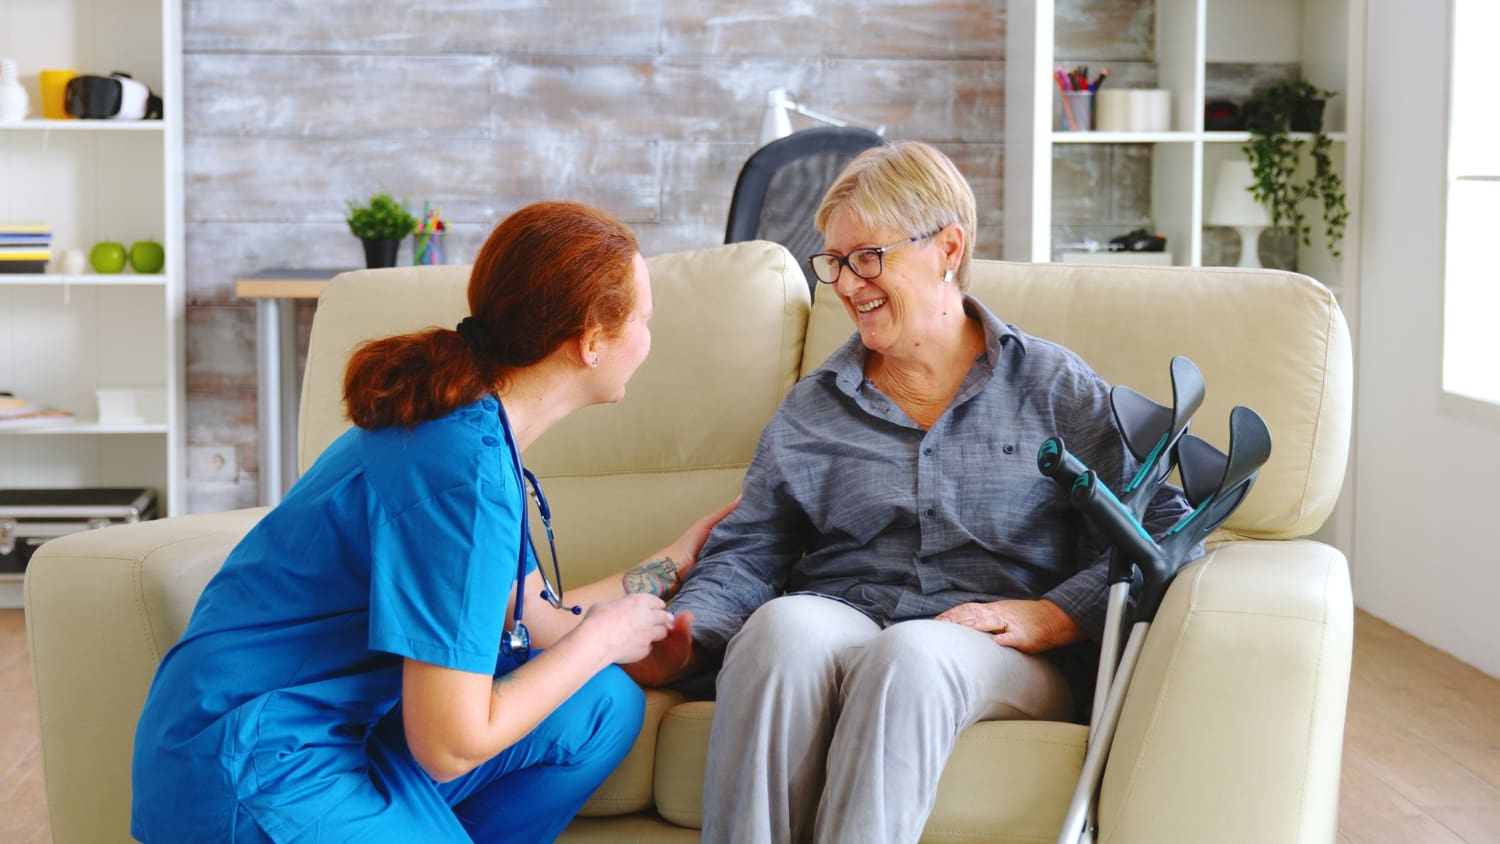 Healthcare professional smiling with elderly woman at home, discussing In-Home Supportive Services with a focus on independence and safety, provided by All Seniors Foundation in California.